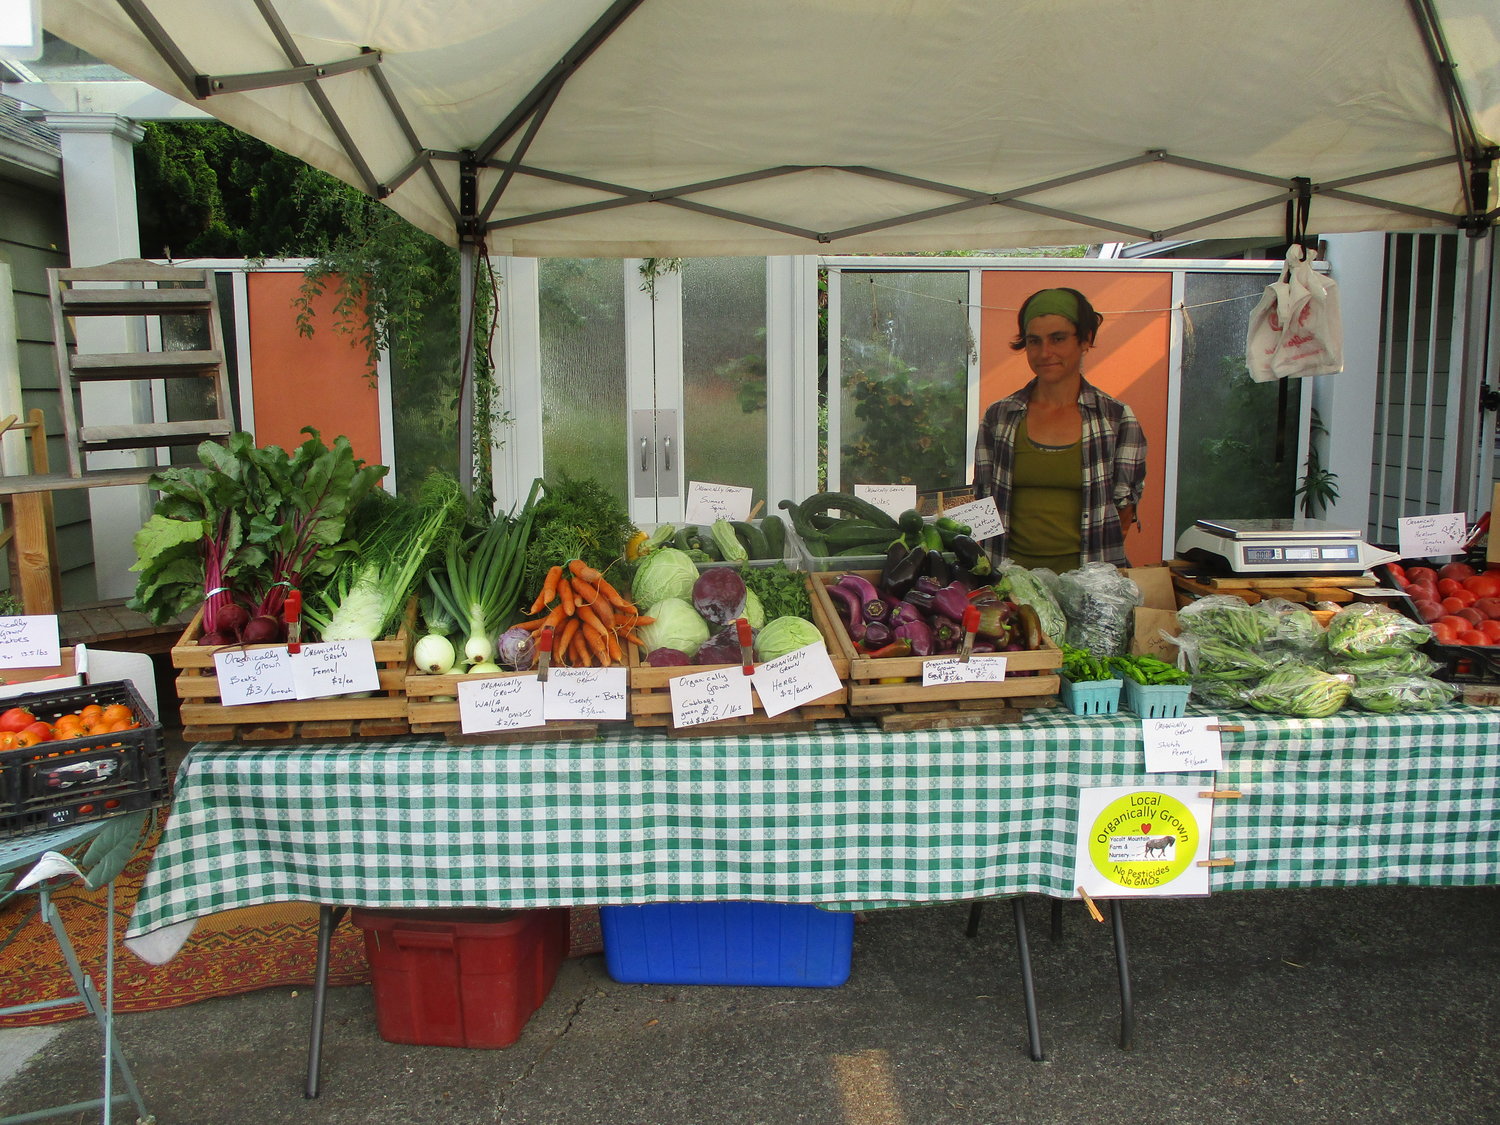 A vendor for the Yacolt Mountain Farm attended a previous Old Town Farmers Market event.